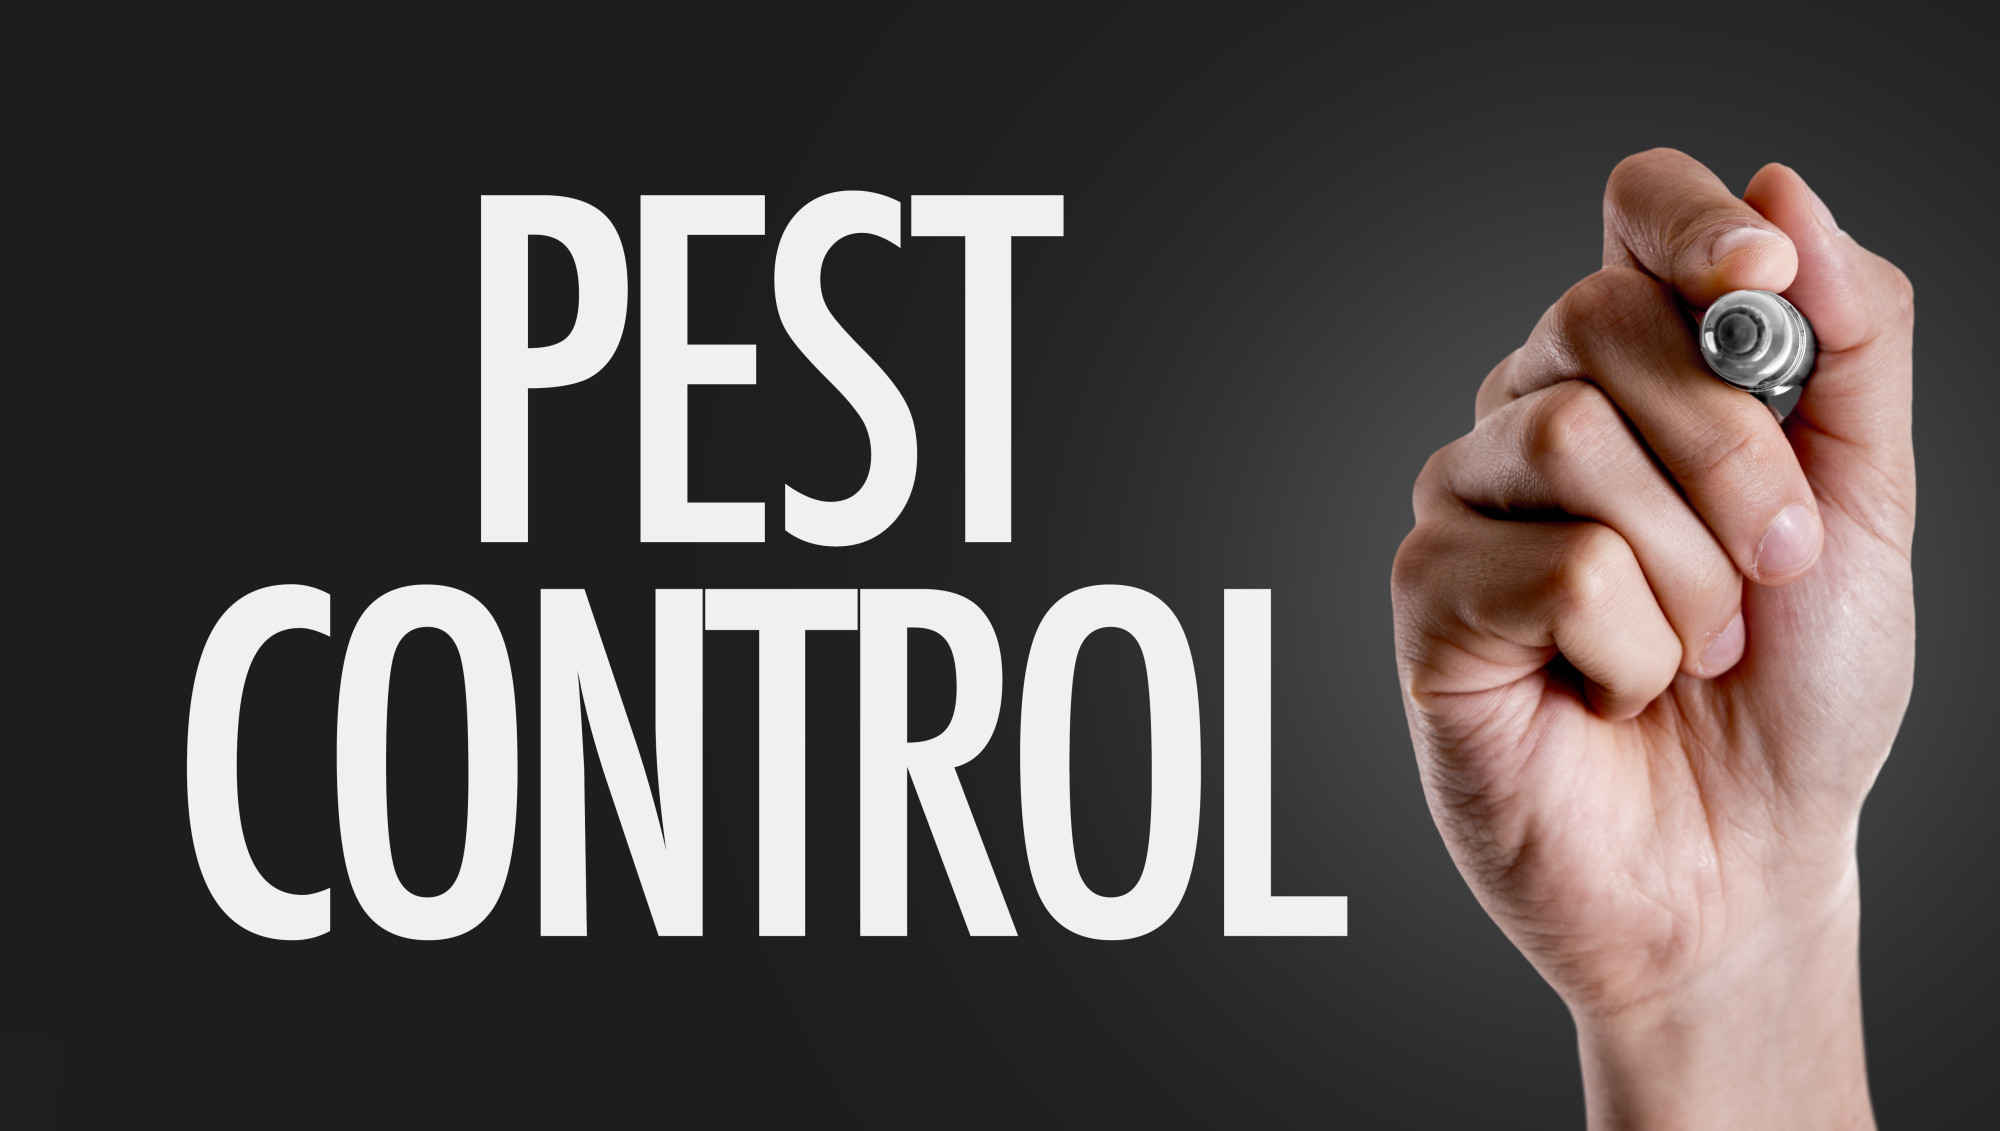 5 Ways to Ensure Your Warehouse is Pest Free